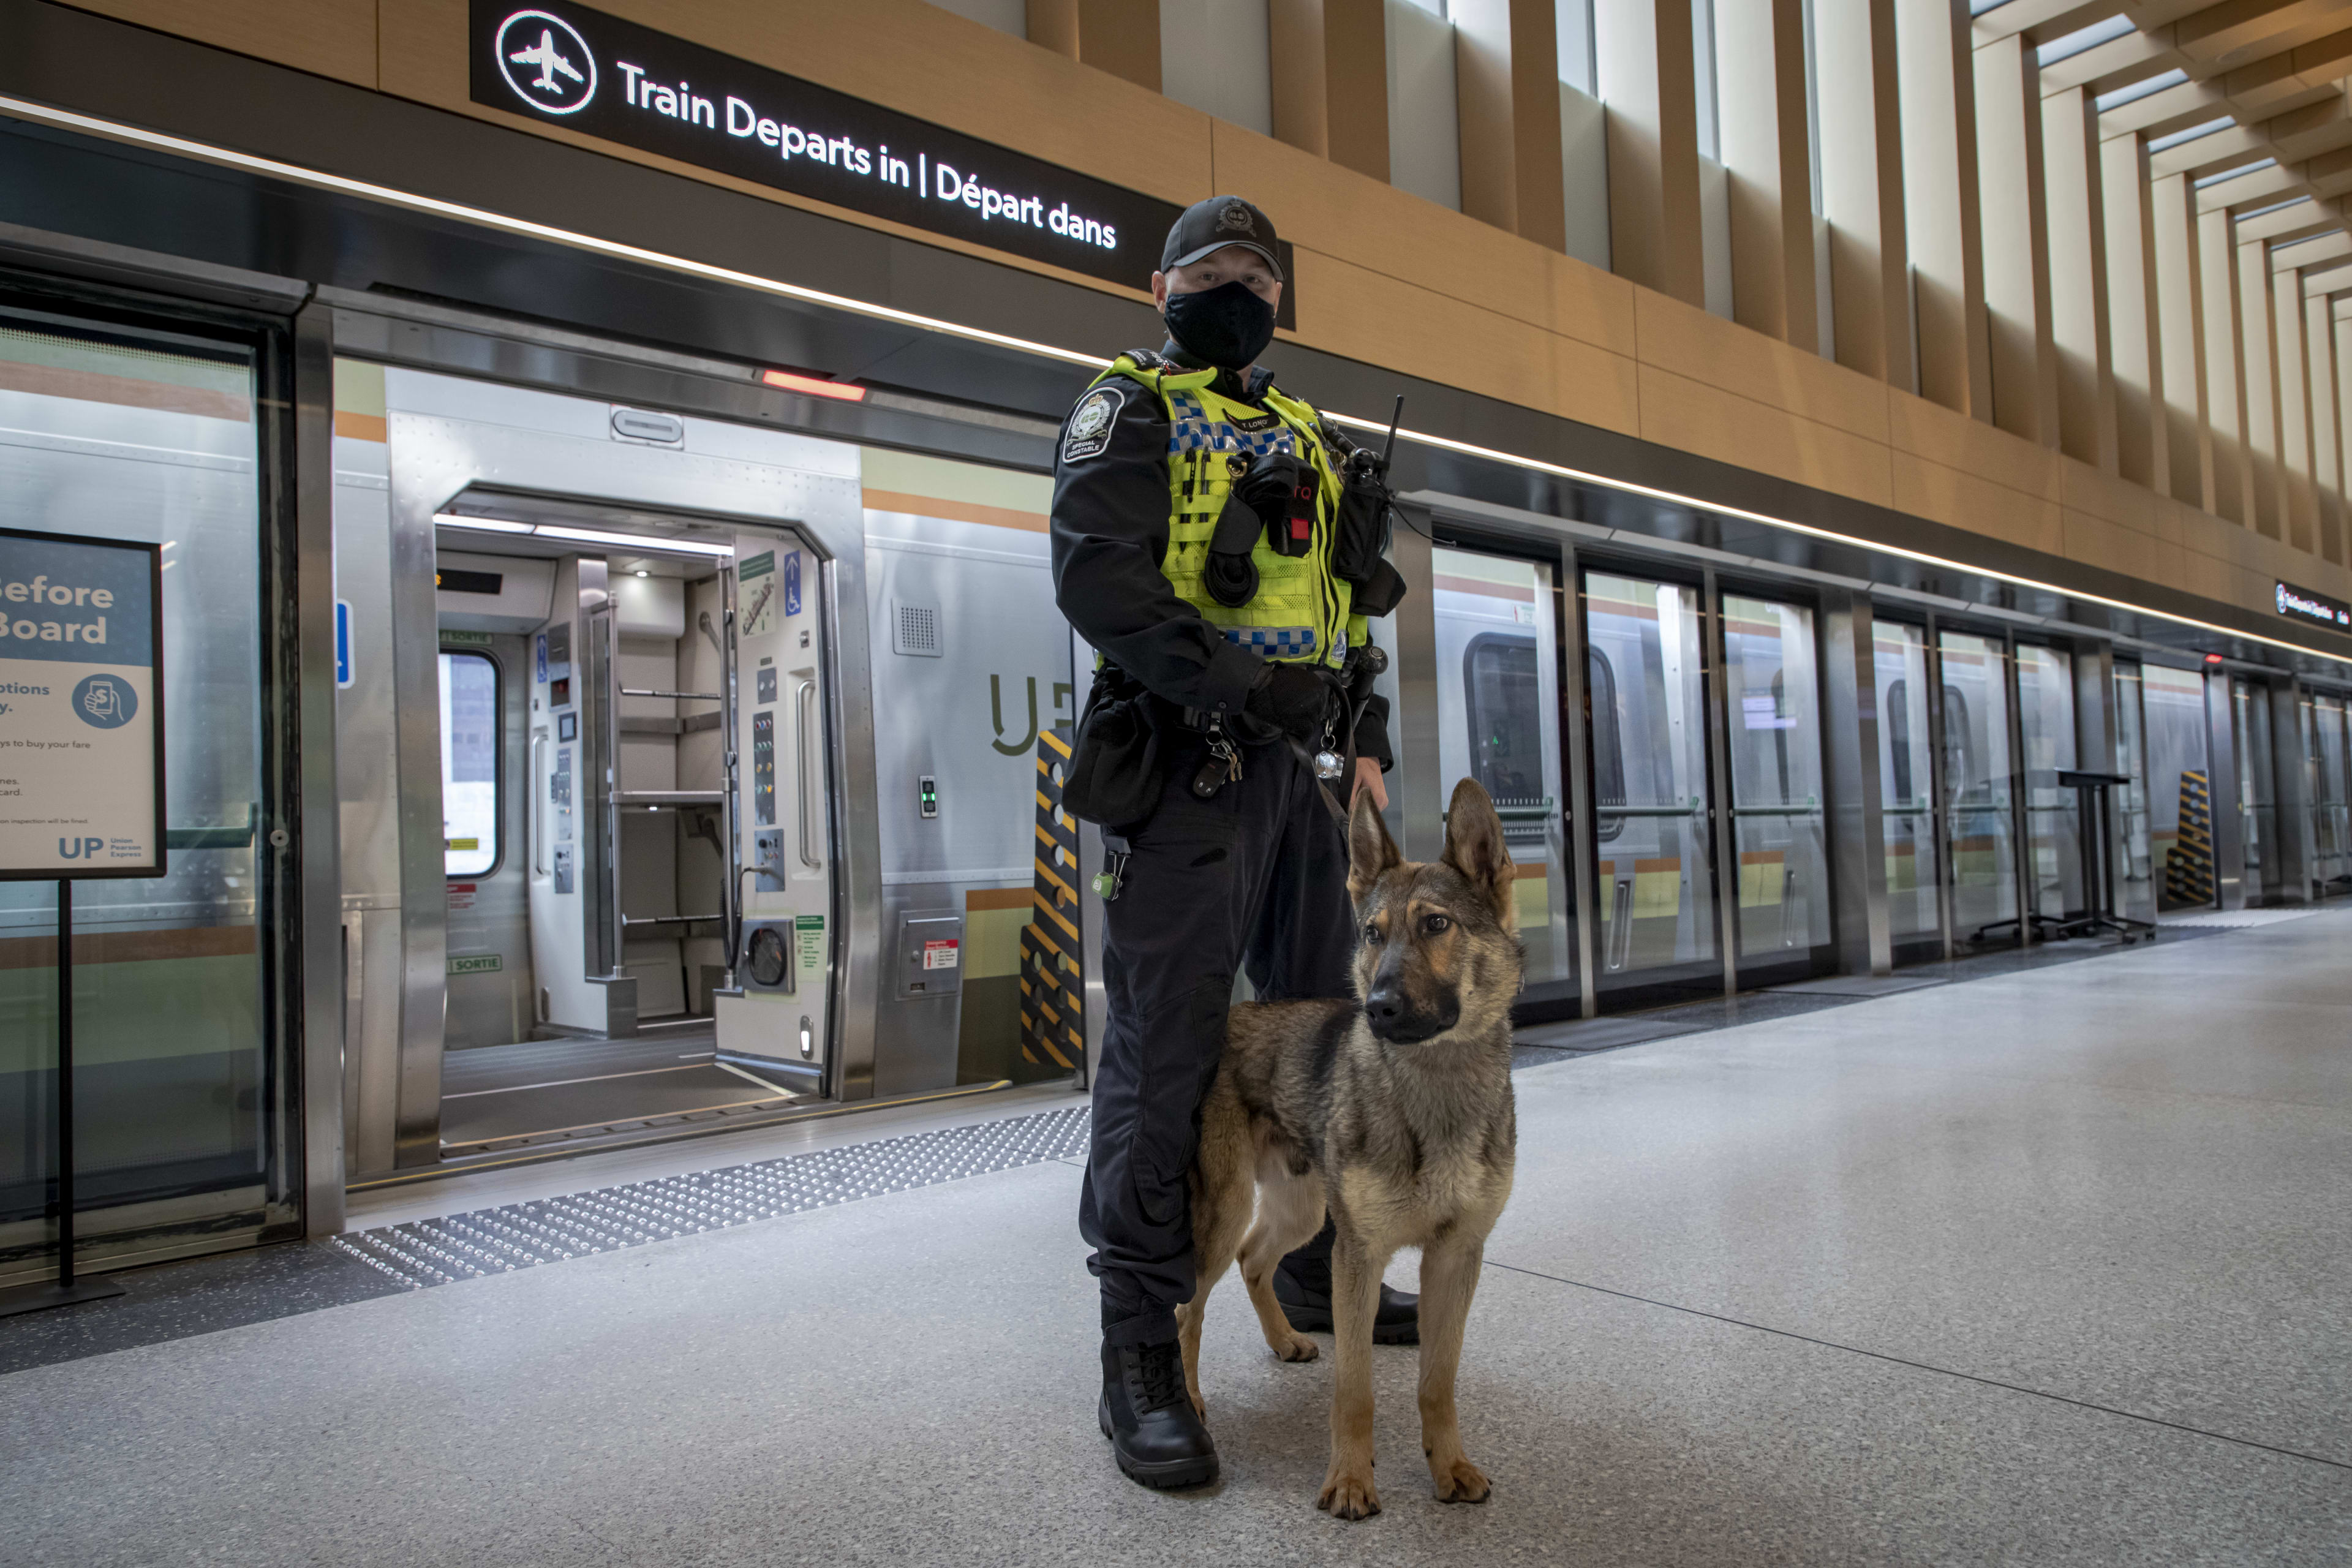 Dog and handler pose for pictures next to an UP Express train.